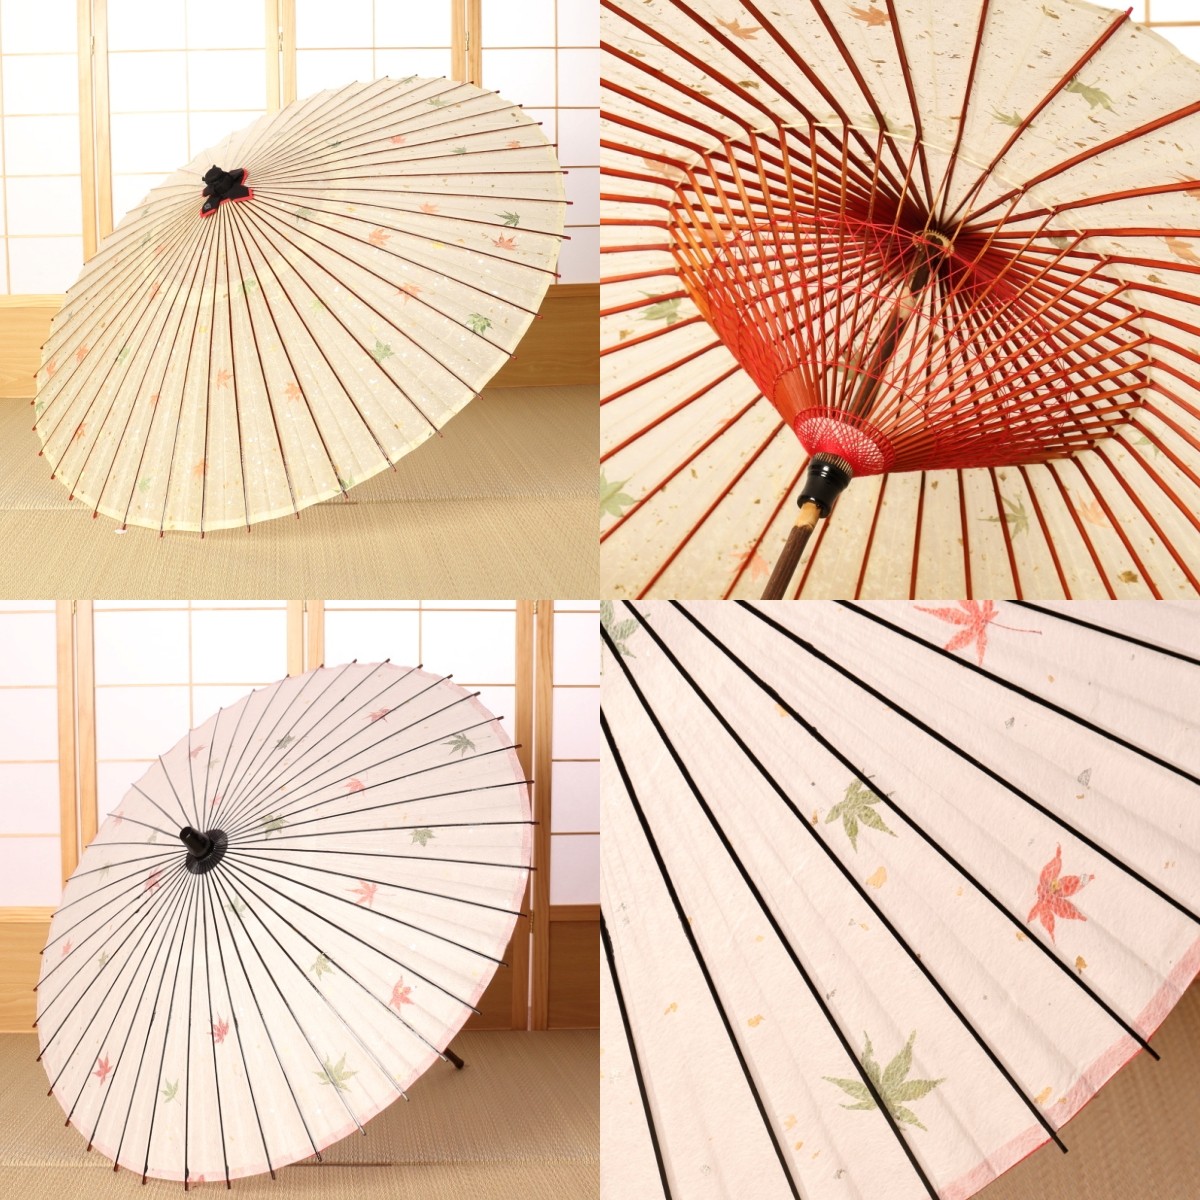 【Autumn Leaves x Japanese Umbrella】Koyo-patterned Japanese umbrella that you want to bring along for the trip's commemorative photo